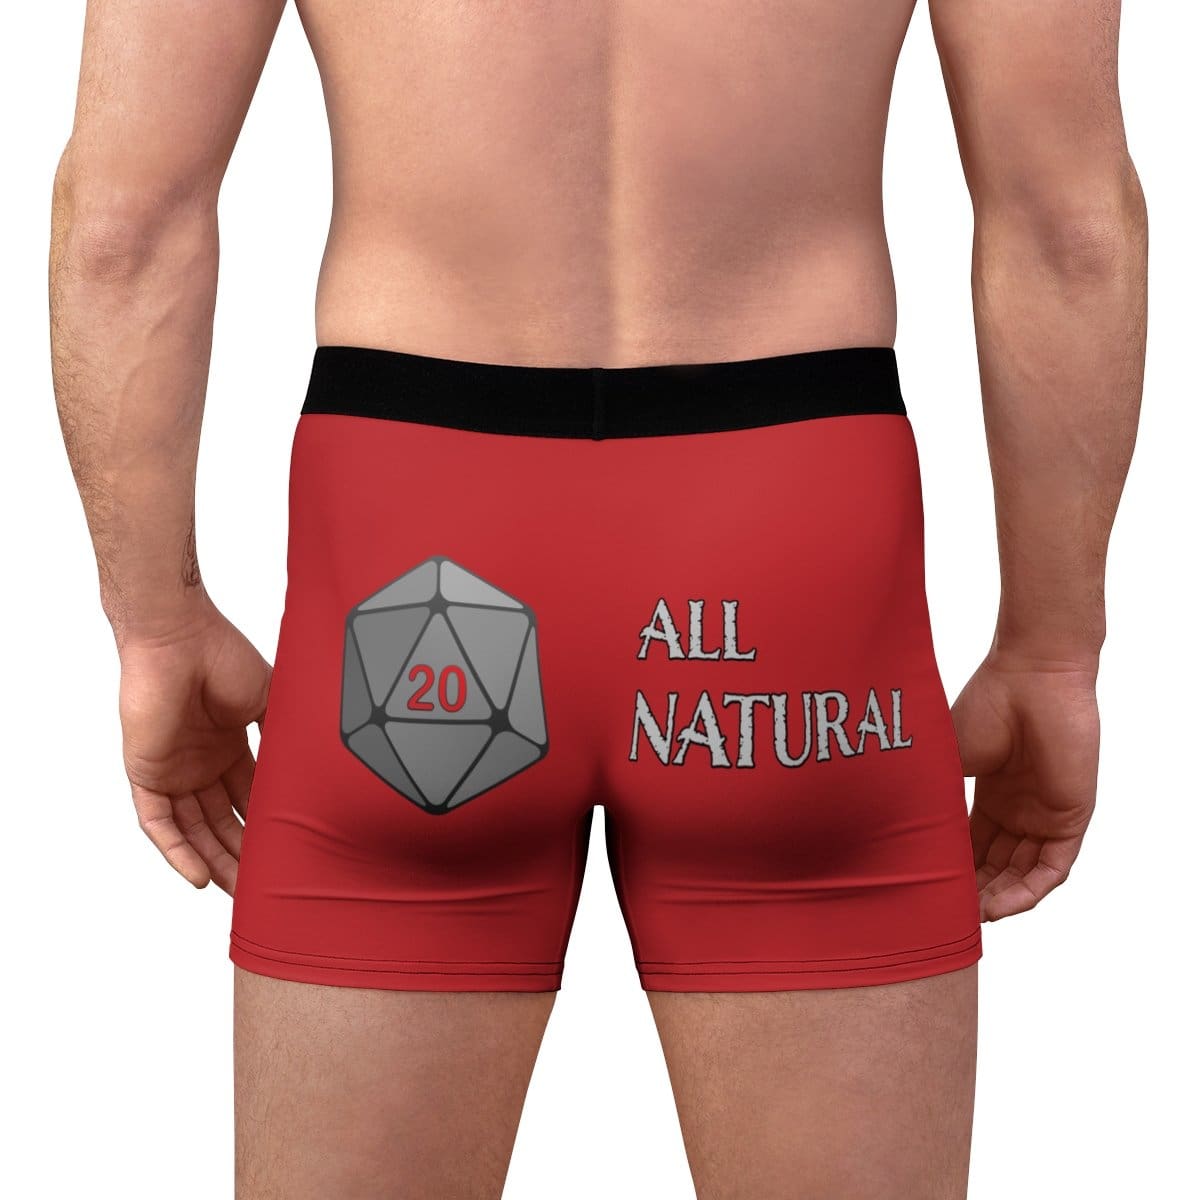 D20 All Natural - Grey on Red Boxer Briefs  Boxer briefs, Men's boxer  briefs, Mens boxer